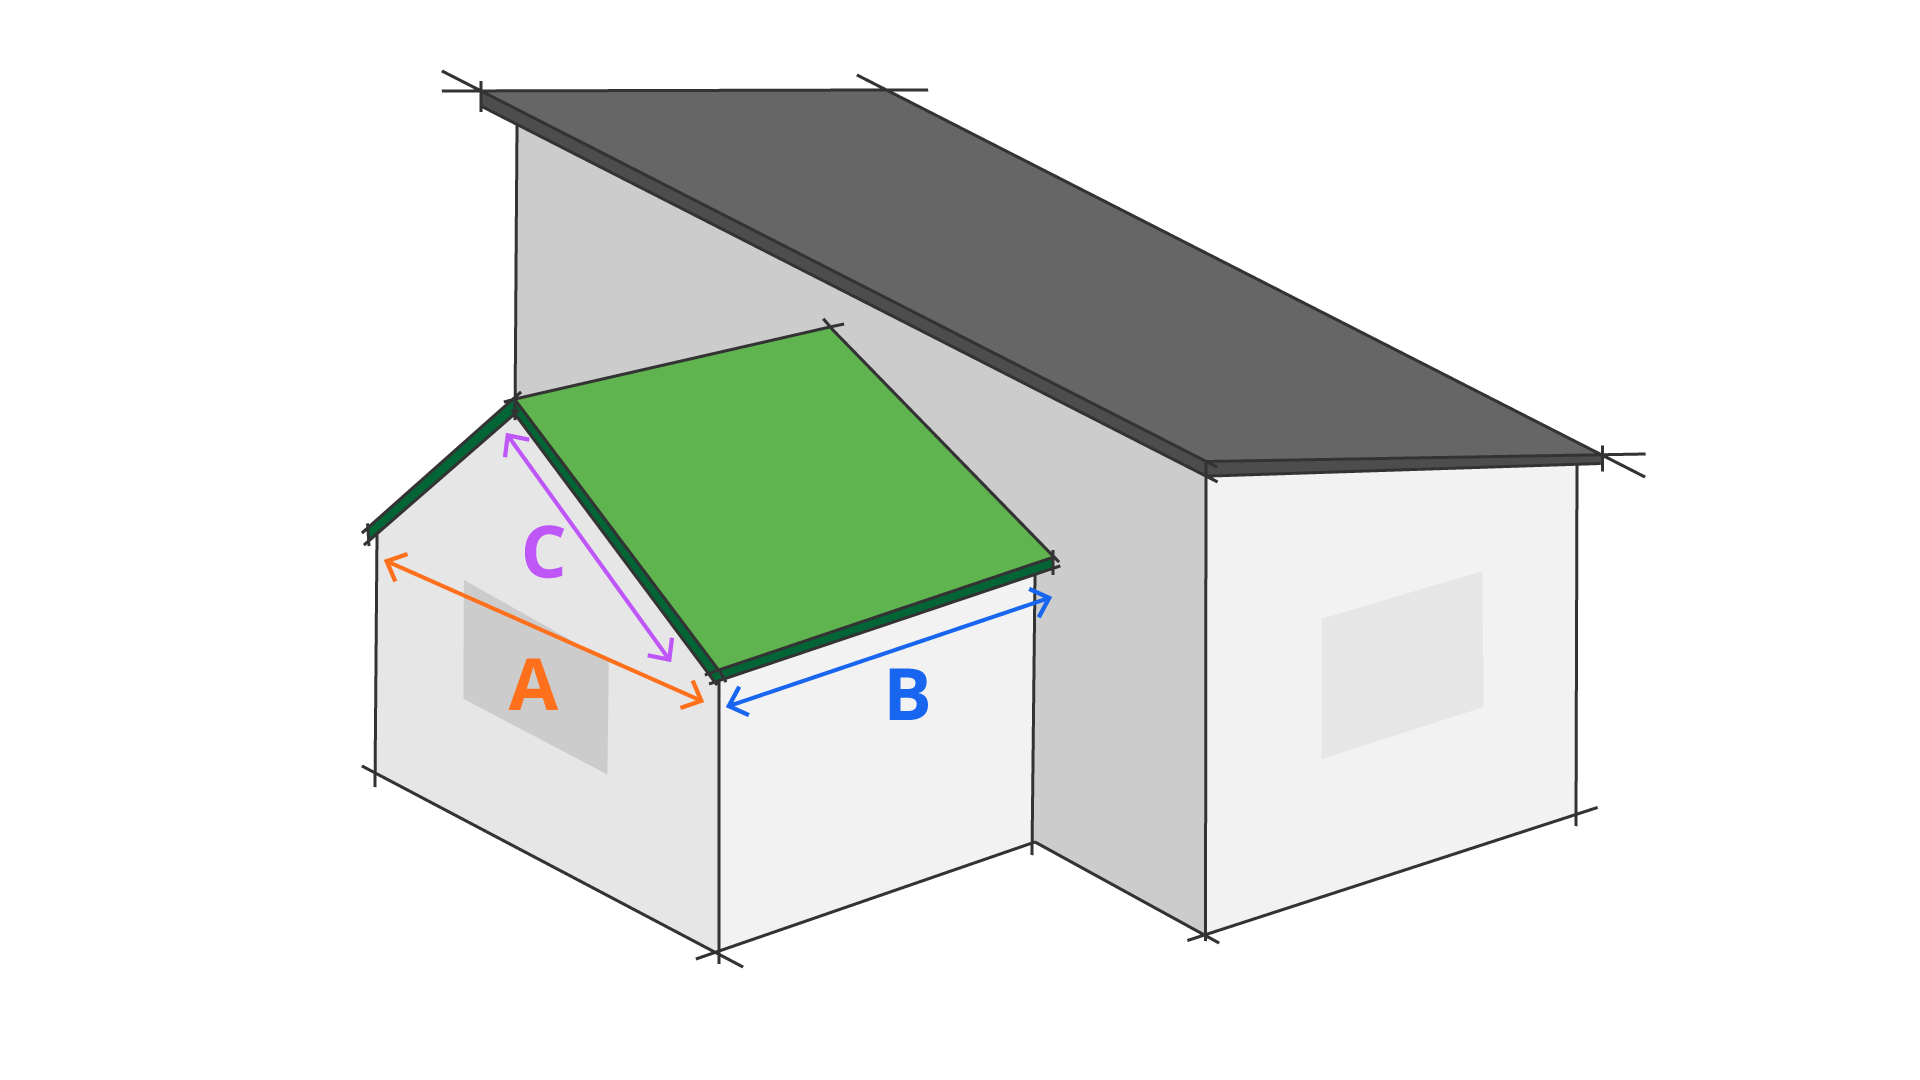 Gable Roof Diagram with coordinates